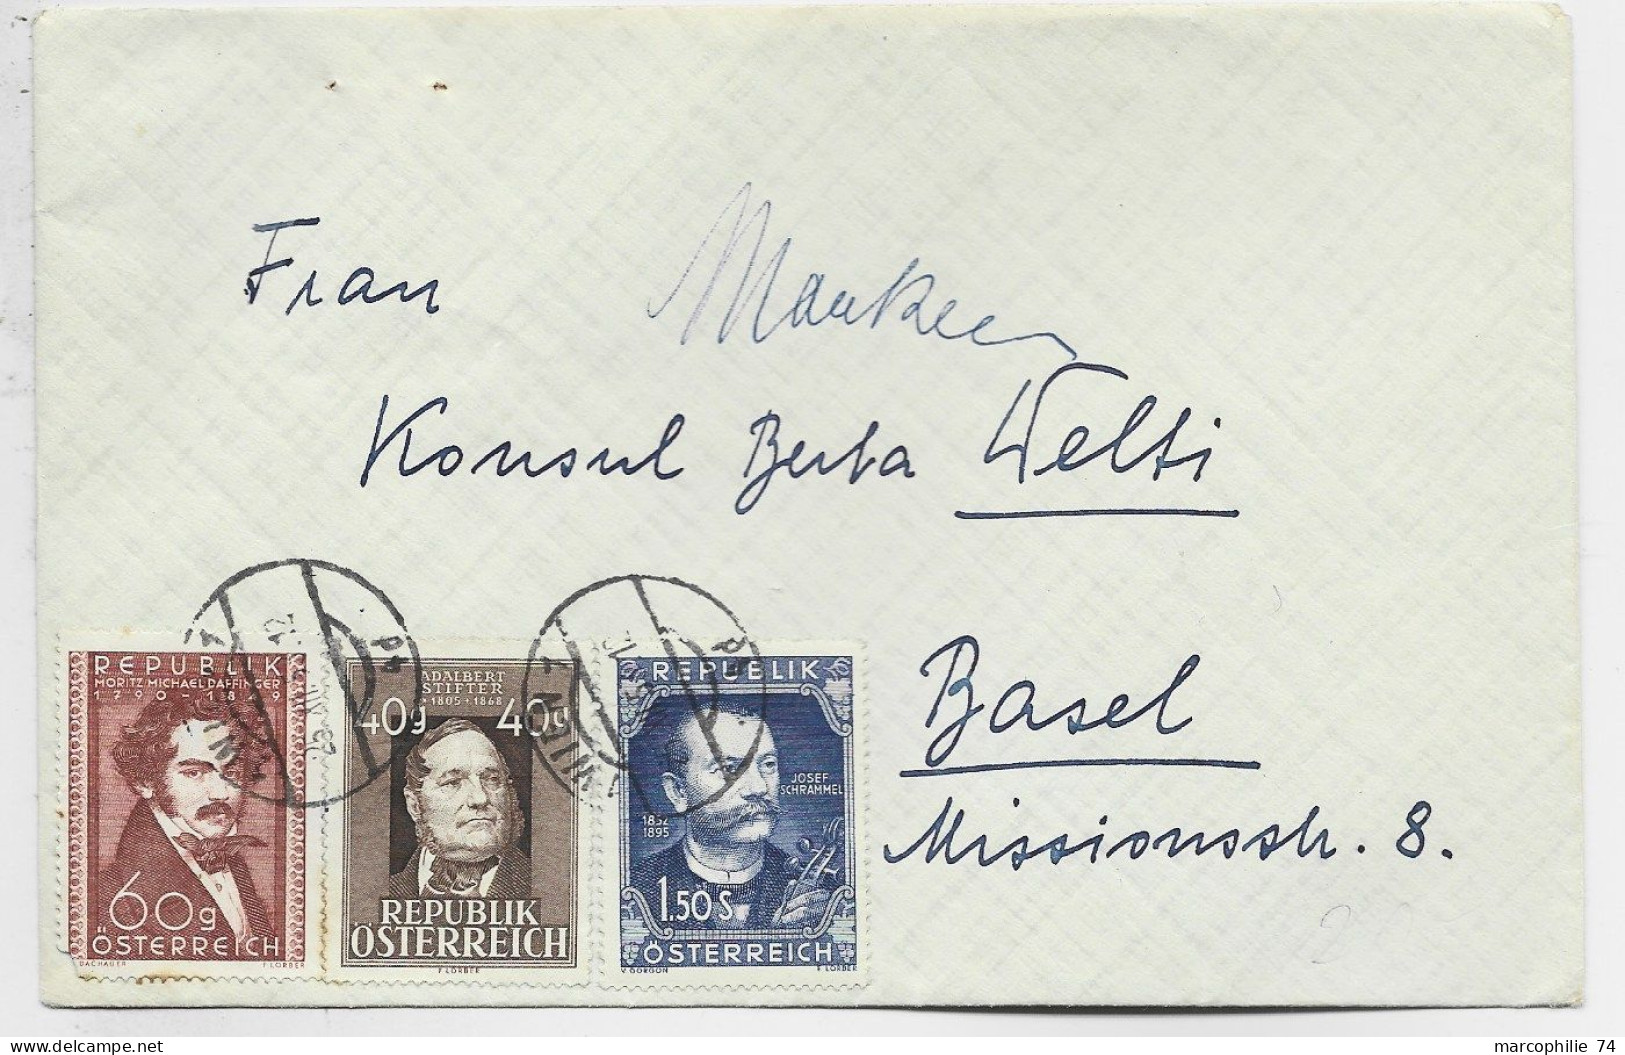 AUSTRIA OSTERREICH 60G+40G+ 1.50S LETTRE COVER BRIEF WIEN 1958 TO BASEL SUISSE - Covers & Documents